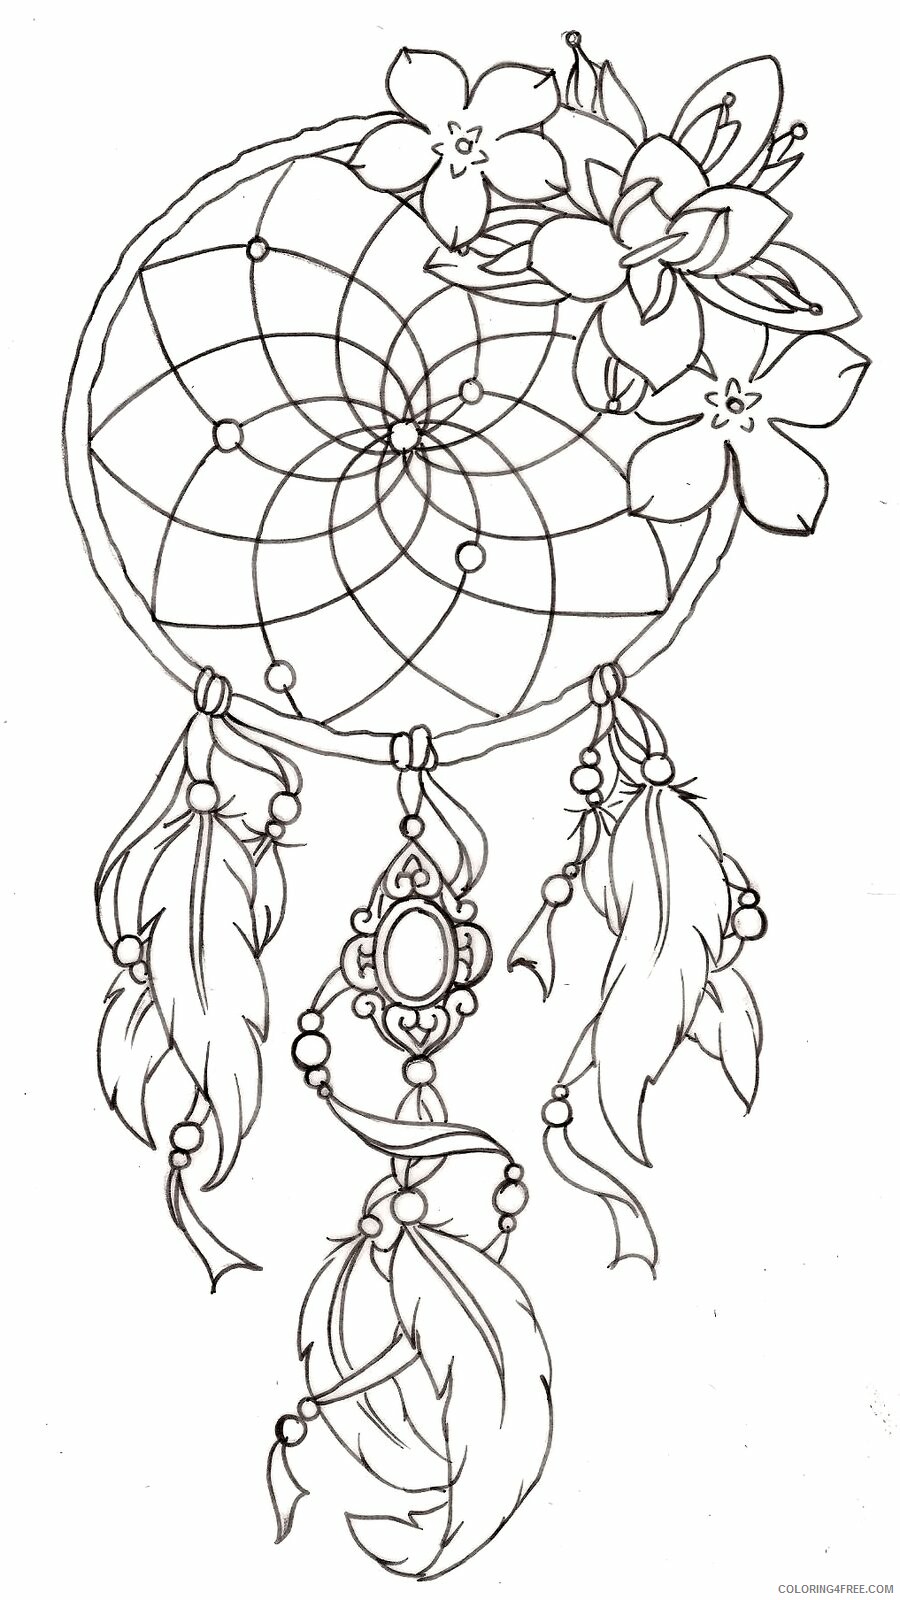 Dream Catcher Coloring Pages Dreamcatcher Indian Printable 2021 2084 Coloring4free